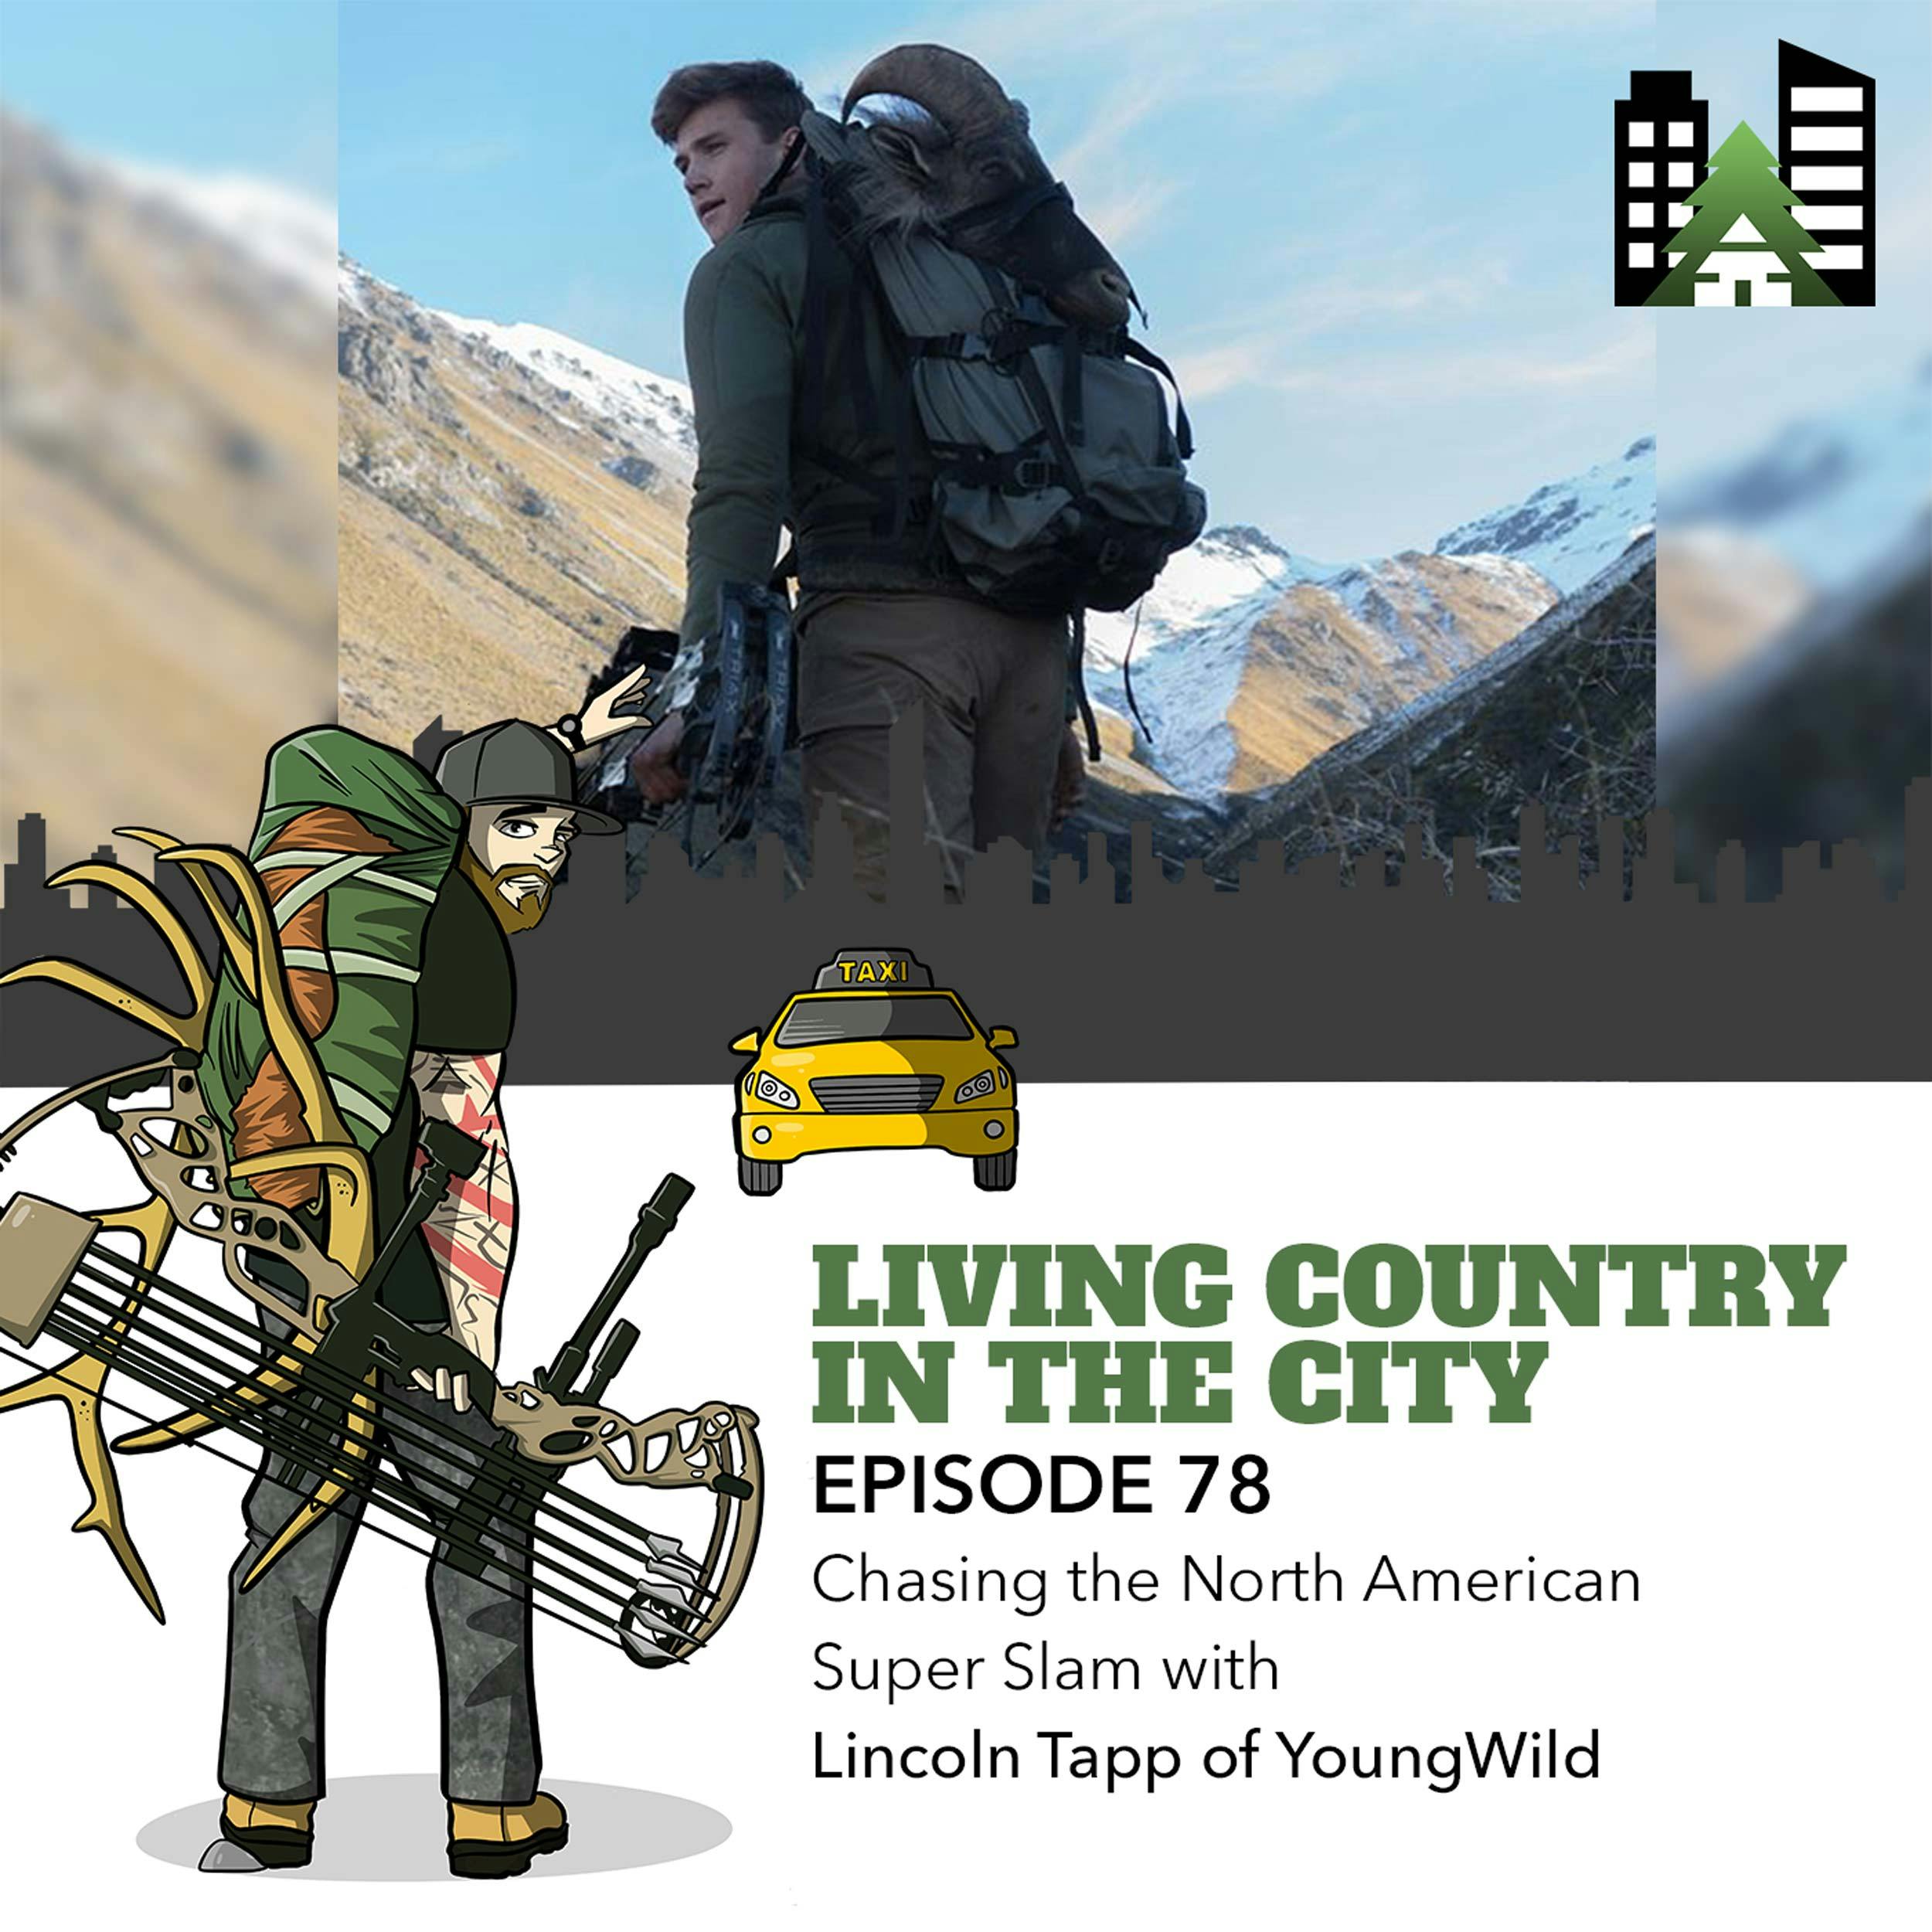 Ep 78 - Chasing the North American Super Slam with Lincoln Tapp of YoungWild